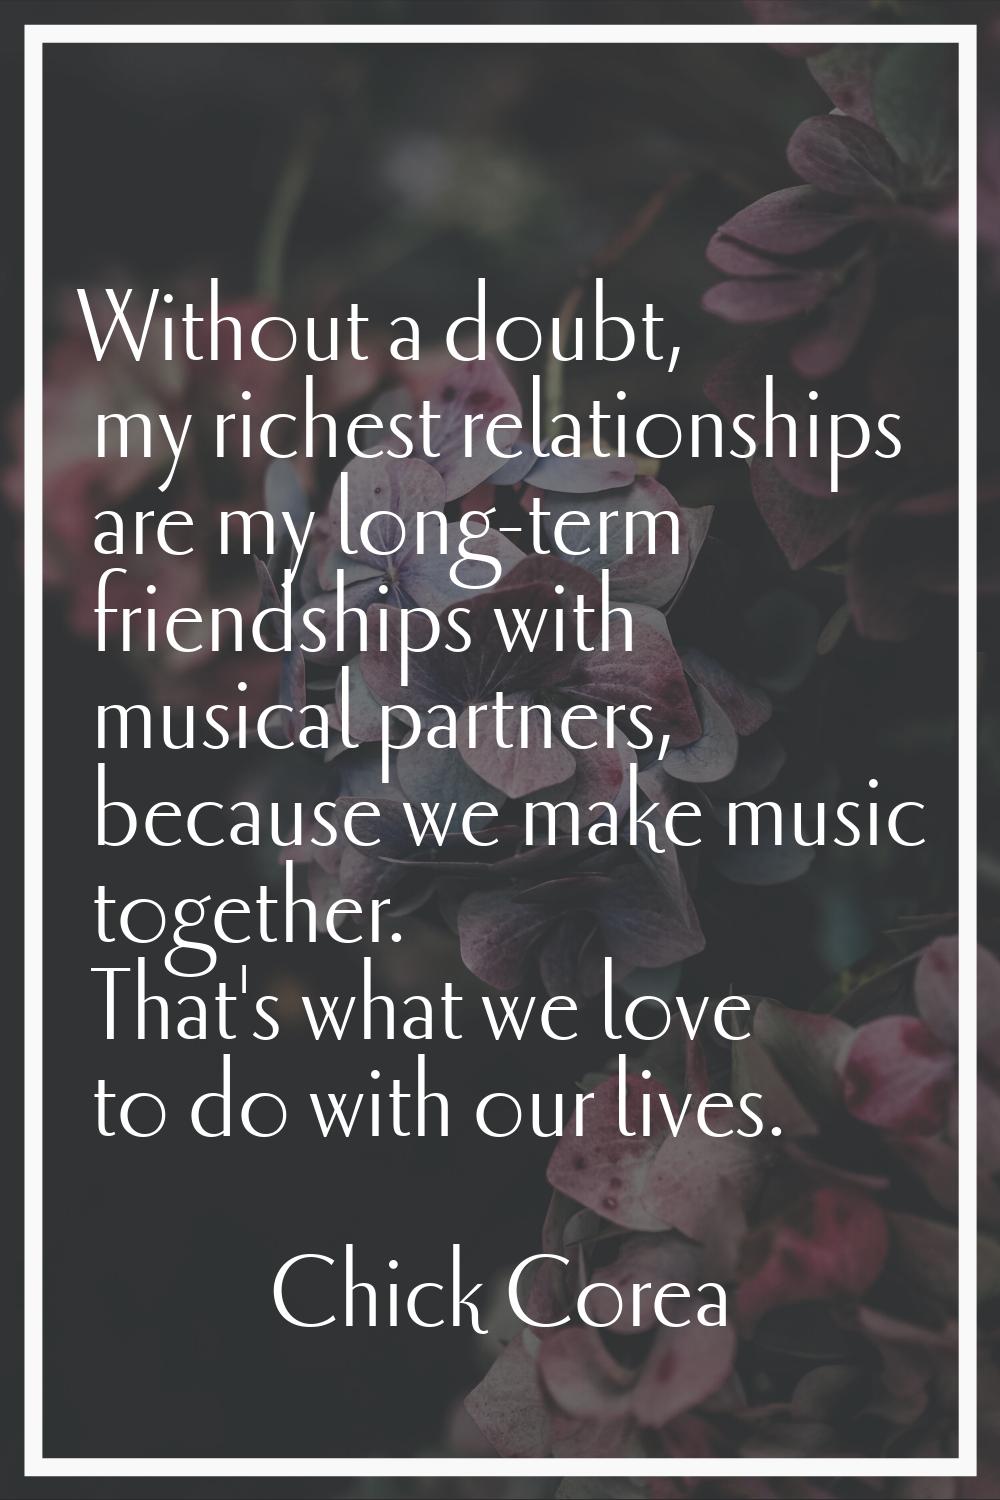 Without a doubt, my richest relationships are my long-term friendships with musical partners, becau